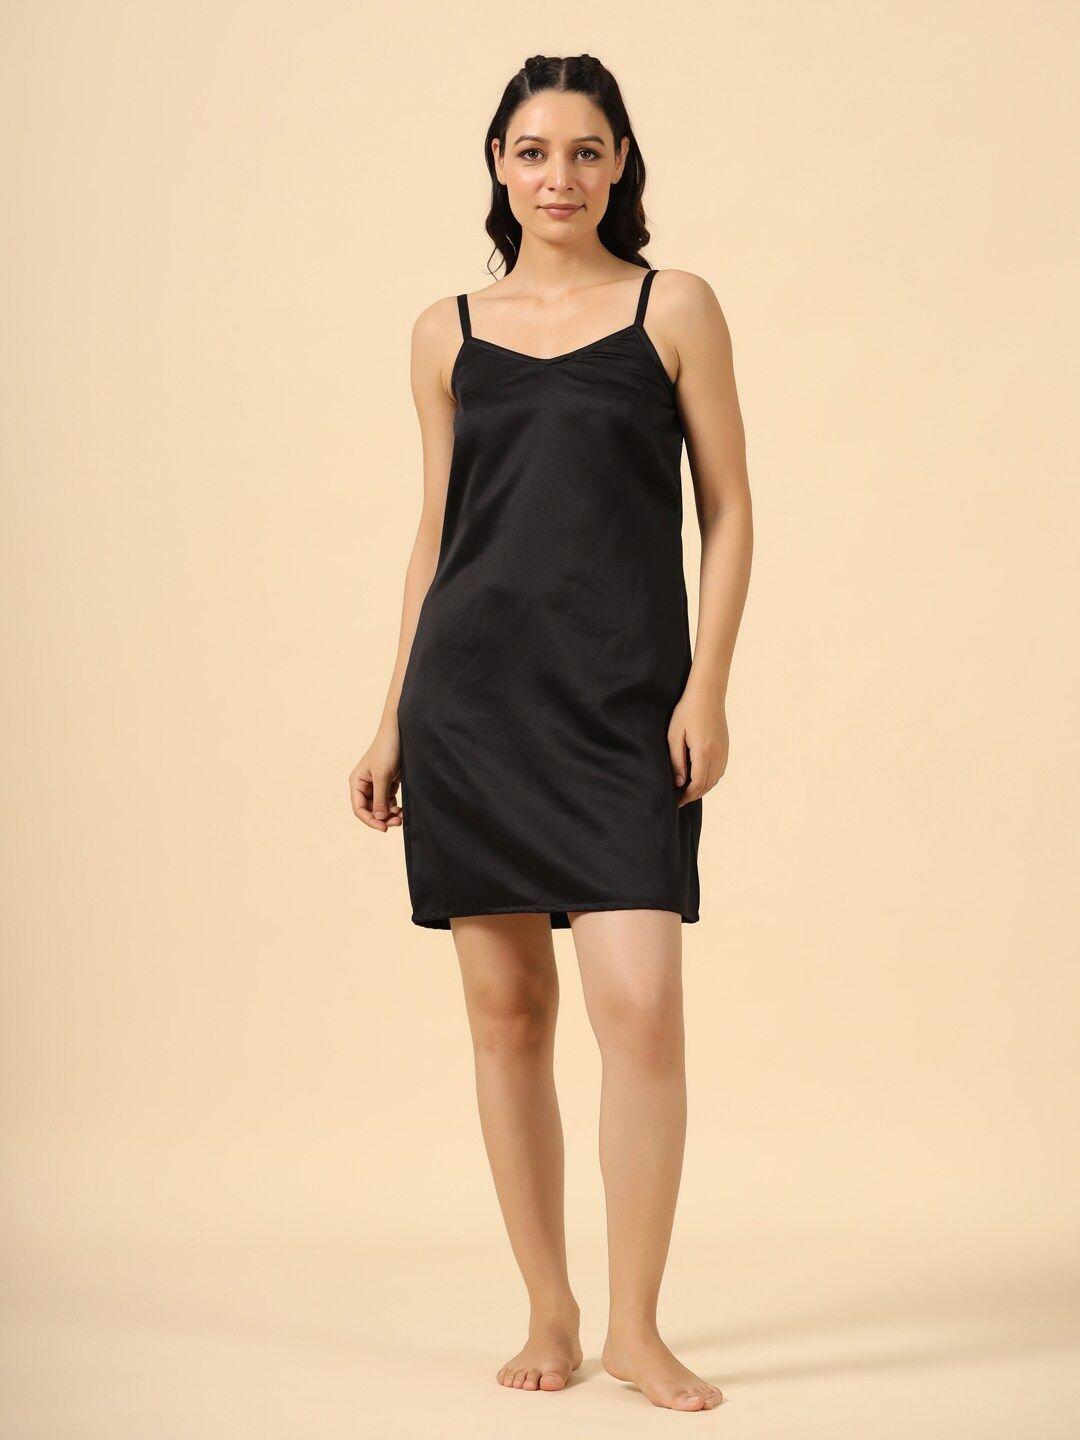 etc-black-shoulder-straps-satin-wrap-nightdress-comes-with-robe